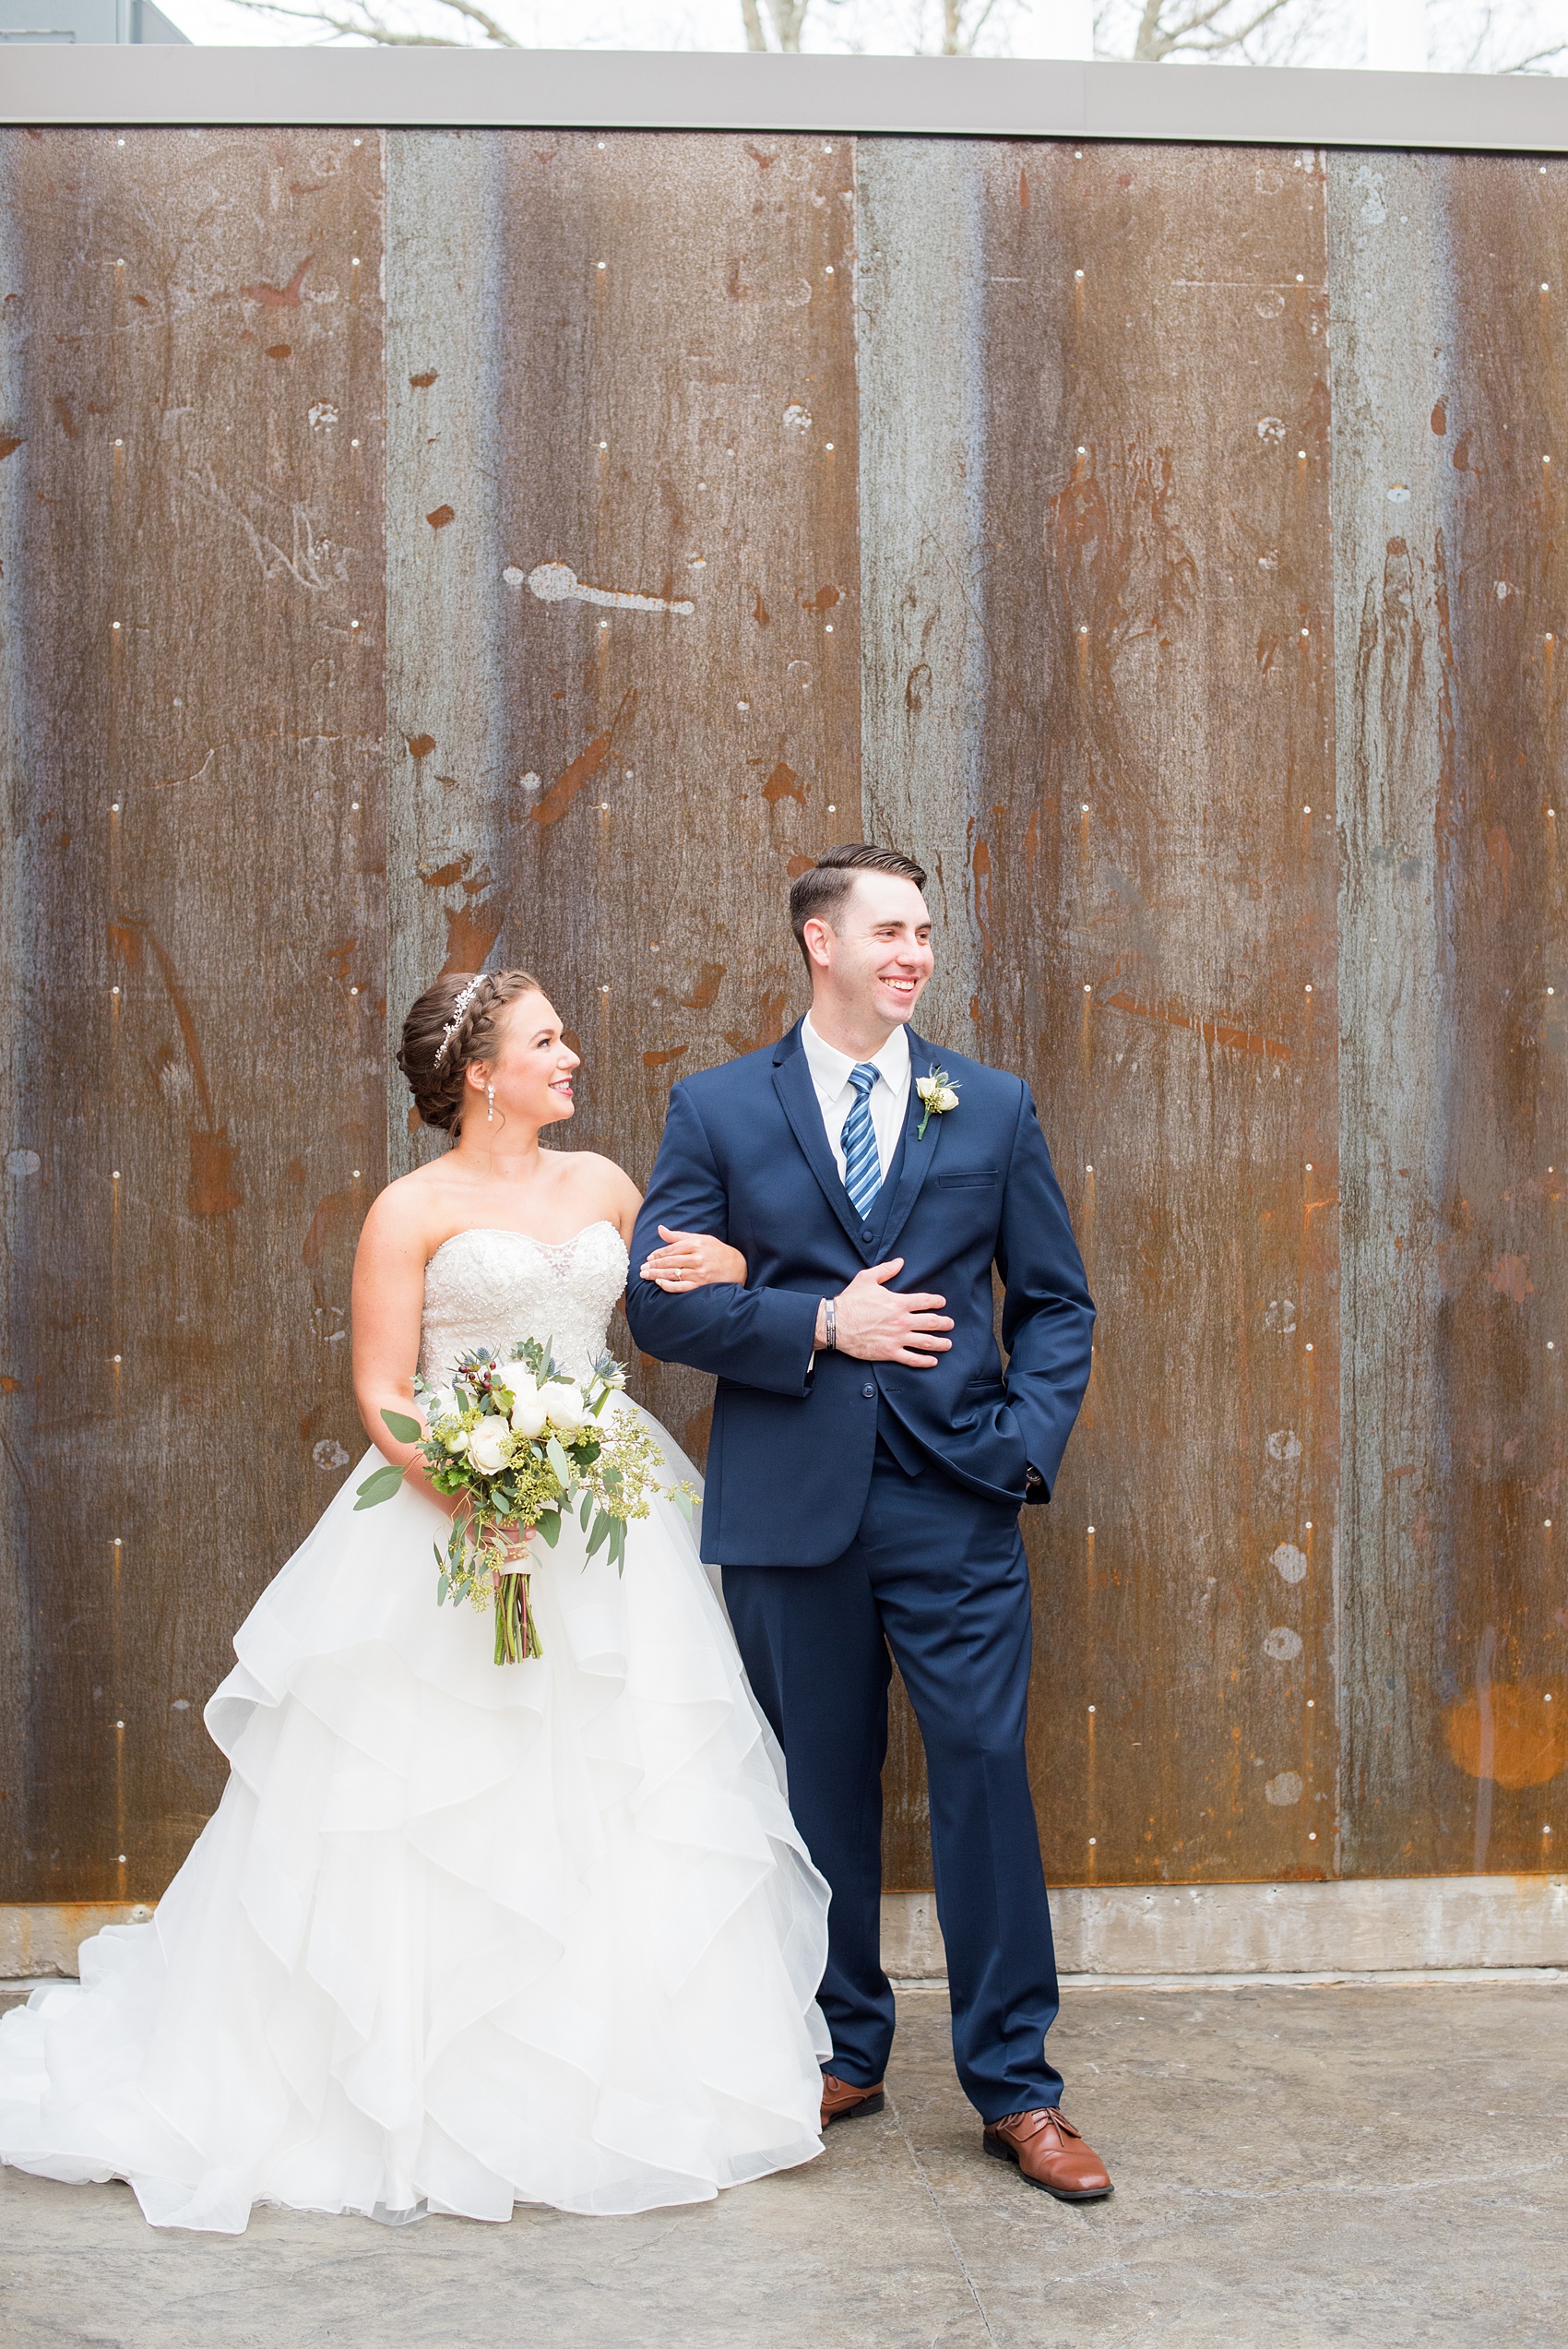 Durham wedding photos at The Cookery by Mikkel Paige Photography in North Carolina. The bride and groom did their first look by the venue's rustic, aged wall. 